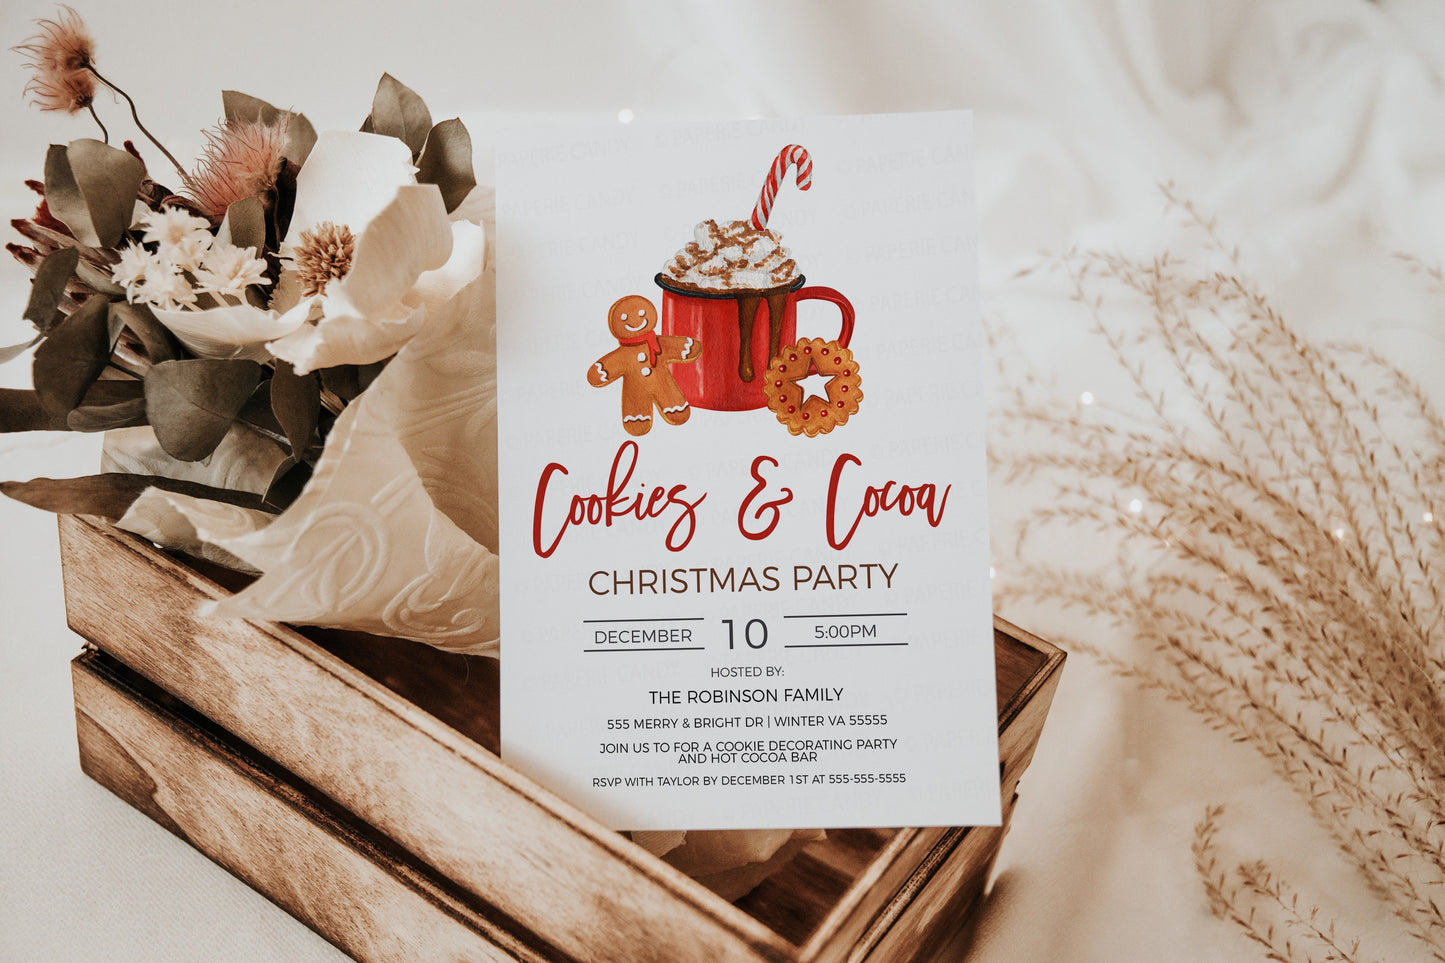 Cookies & Cocoa Party Invitation, Editable Cookie Decorating Party, Hot Chocolate Bar, Holiday Christmas Party, DIY Printable Template